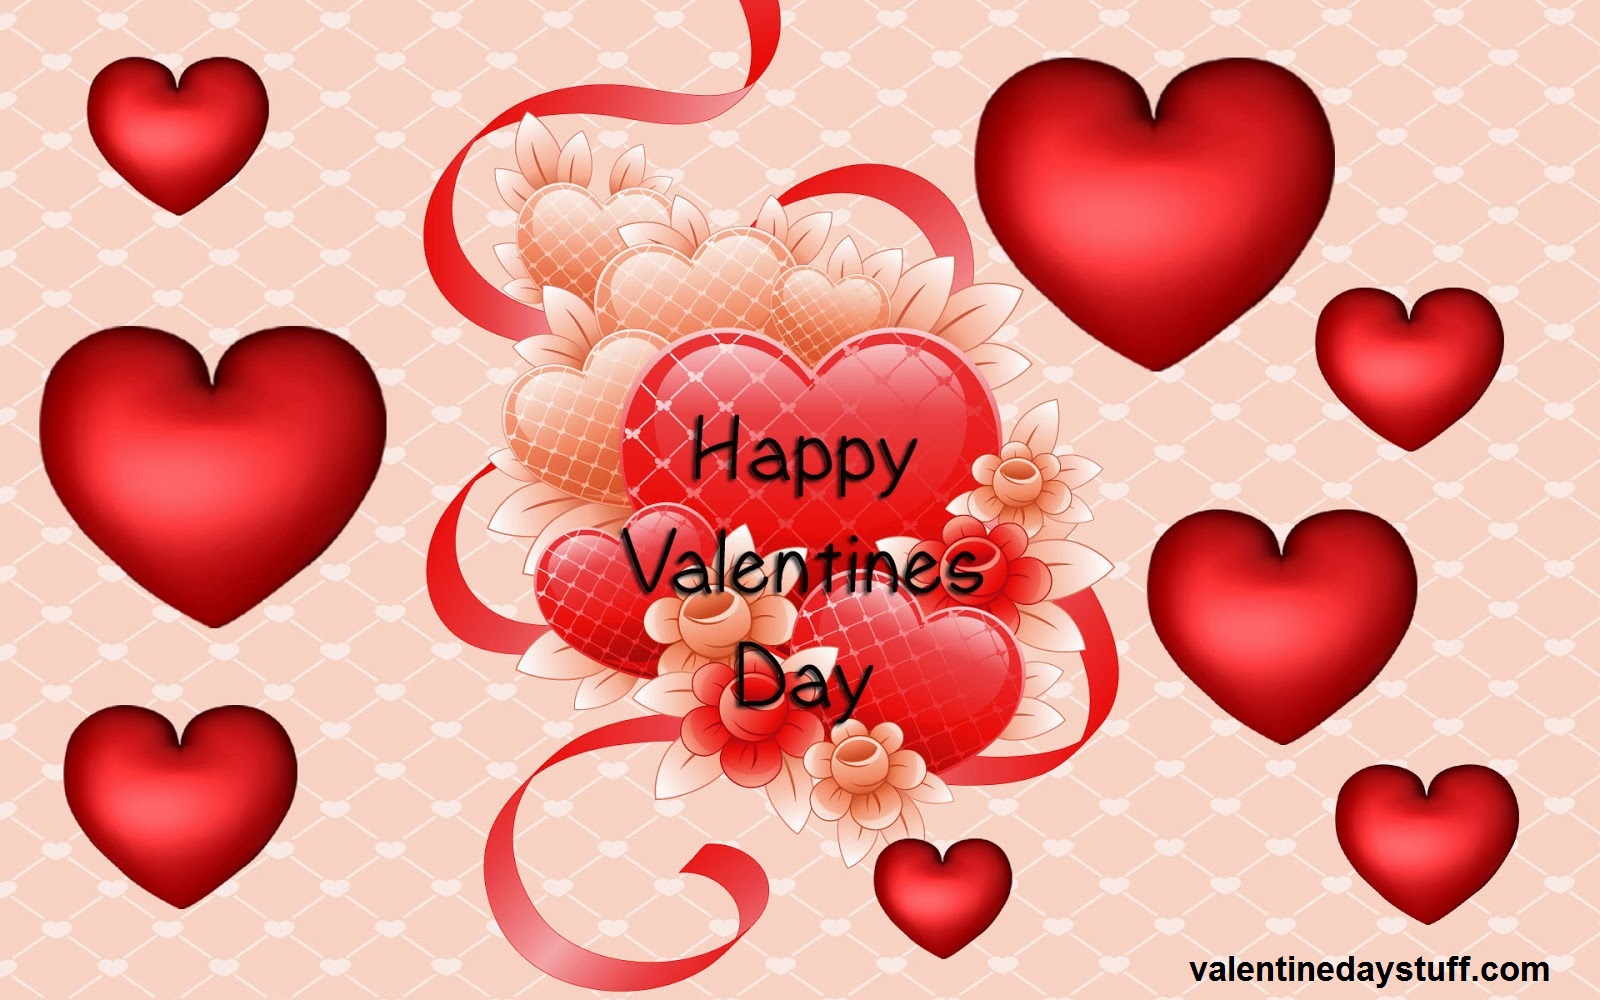 Happy Valentine Day Greeting Cards 2015 for Girlfriend